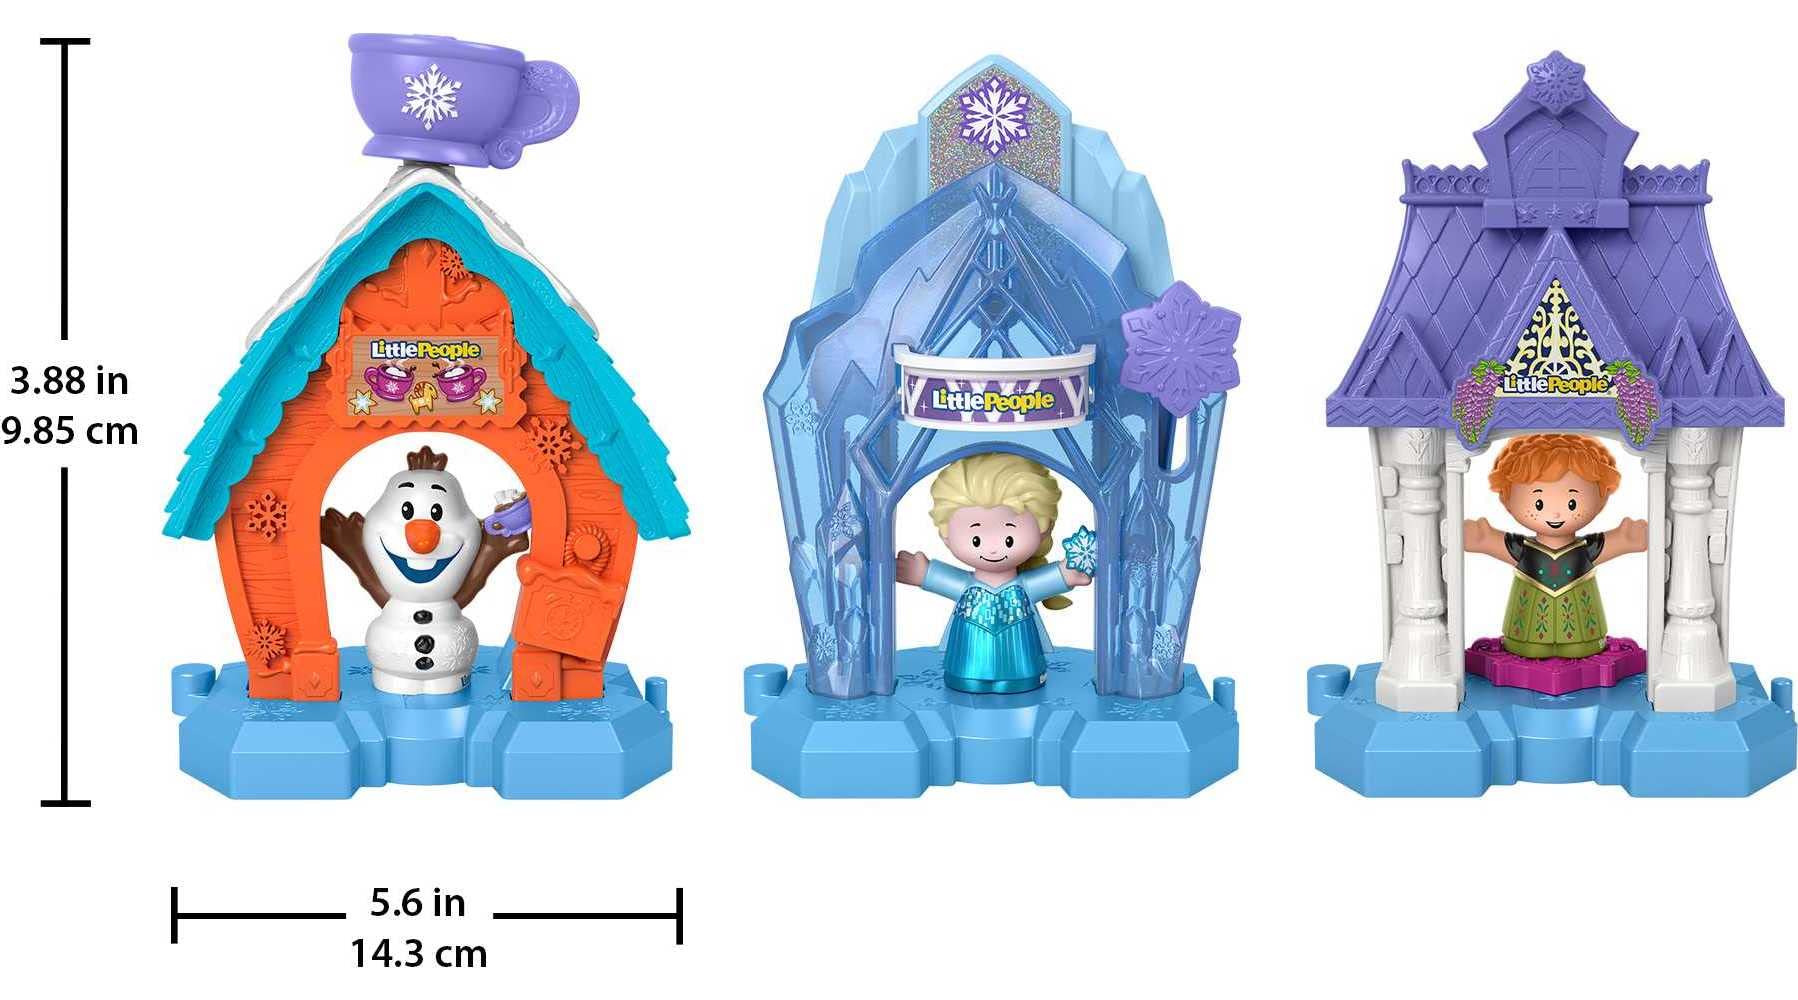 Fisher-Price Disney Frozen Toddler Toys Little People Snowflake Village Playset With Anna Elsa & Olaf Figures For Ages 18+ Months